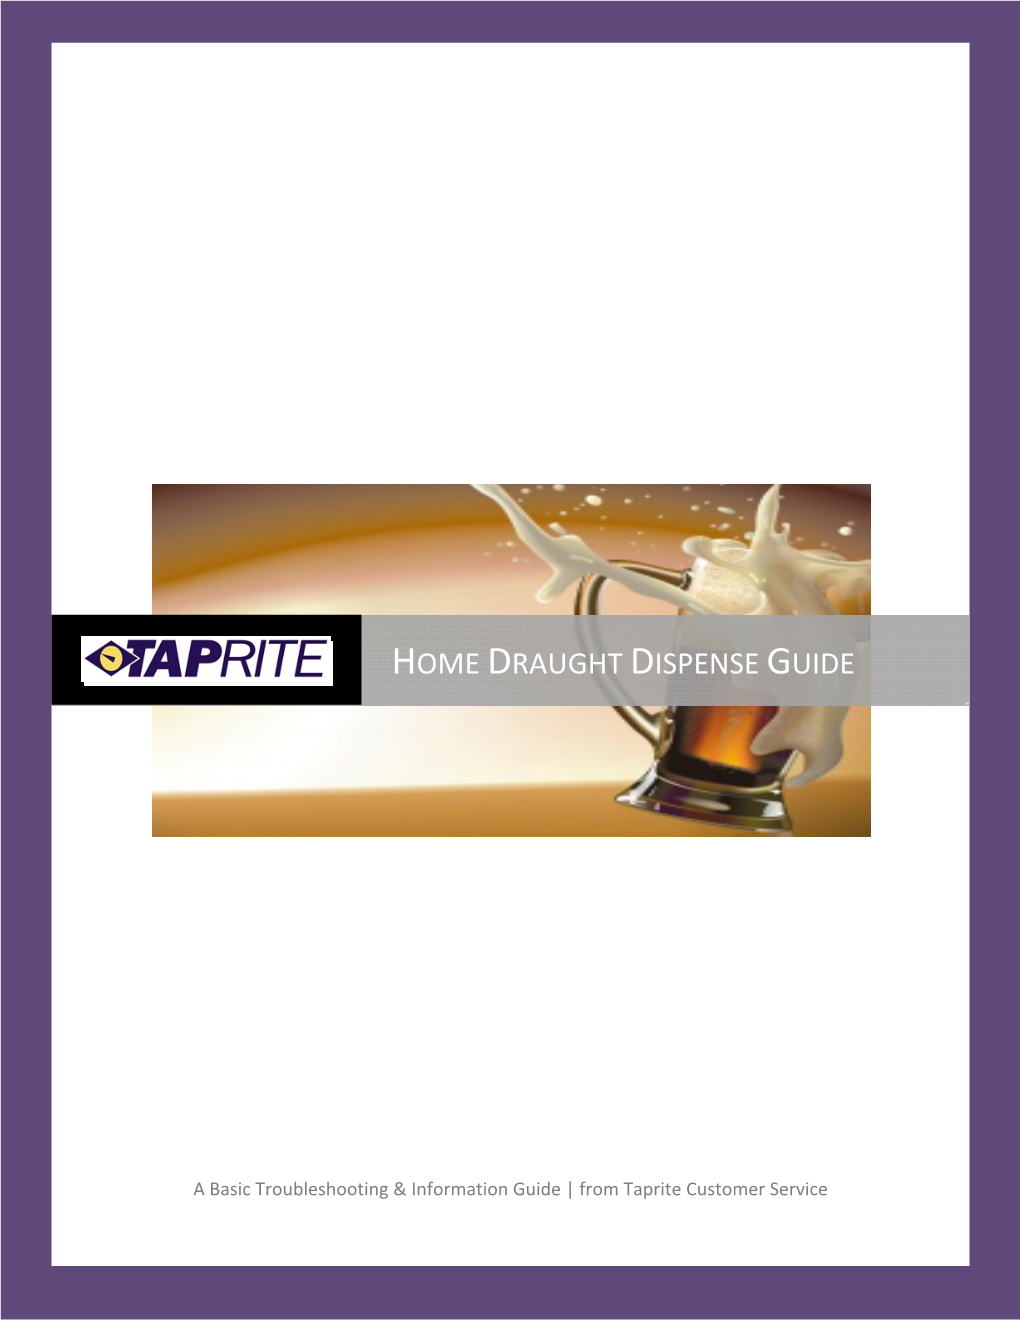 Home Draught Dispense Guide